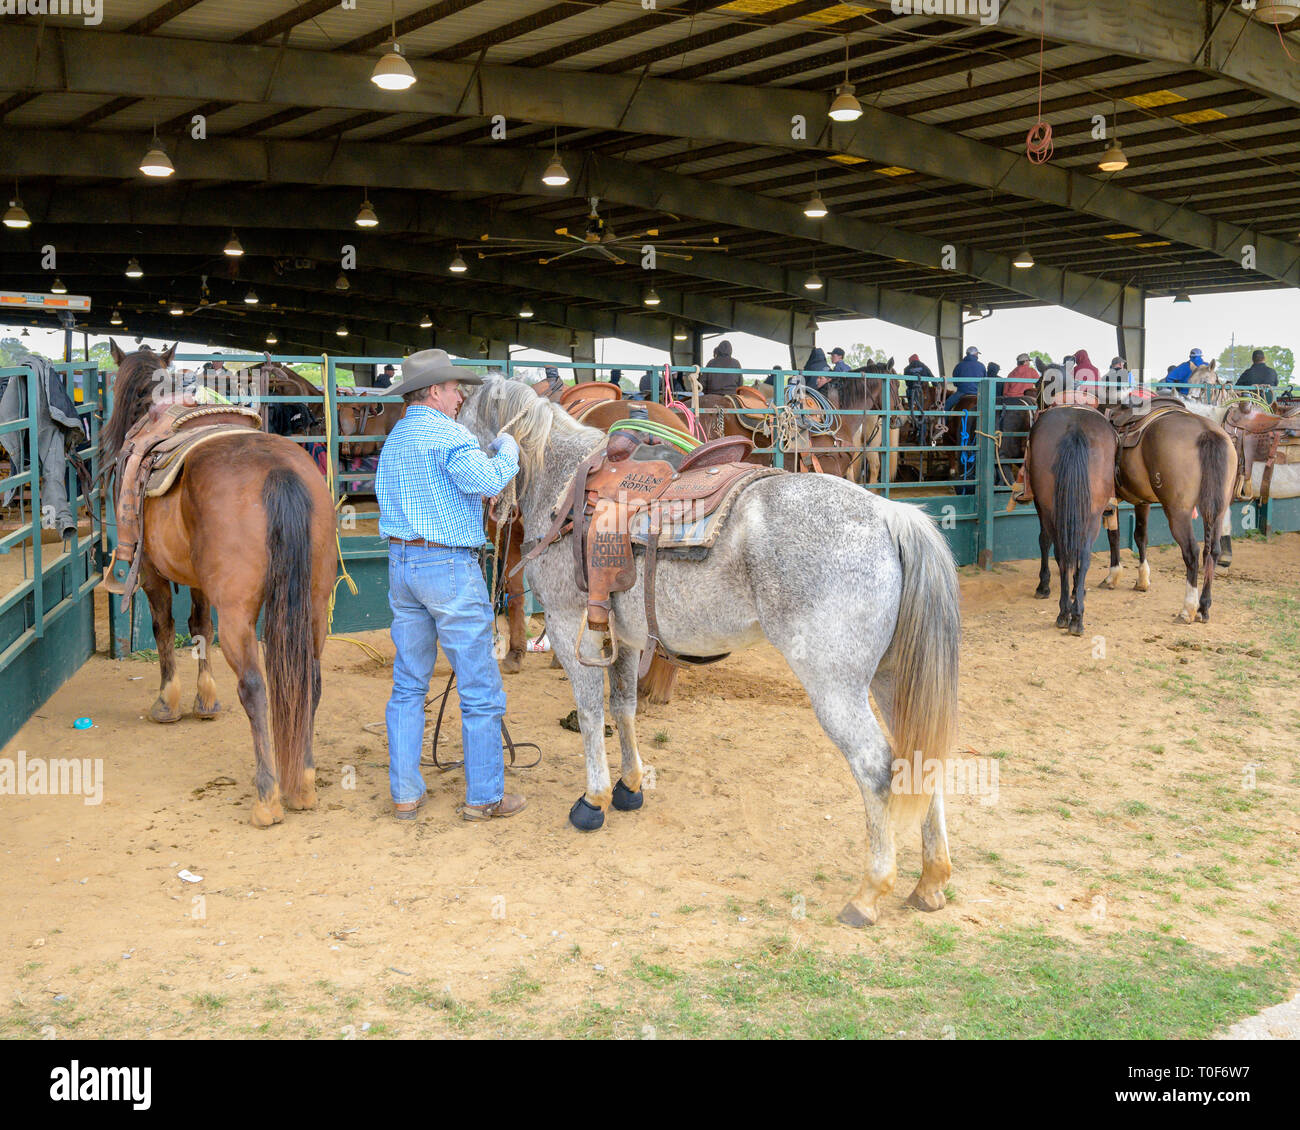 American cowboy and his grey horse saddled at a rodeo event in Montgomery Alabama, USA. Stock Photo